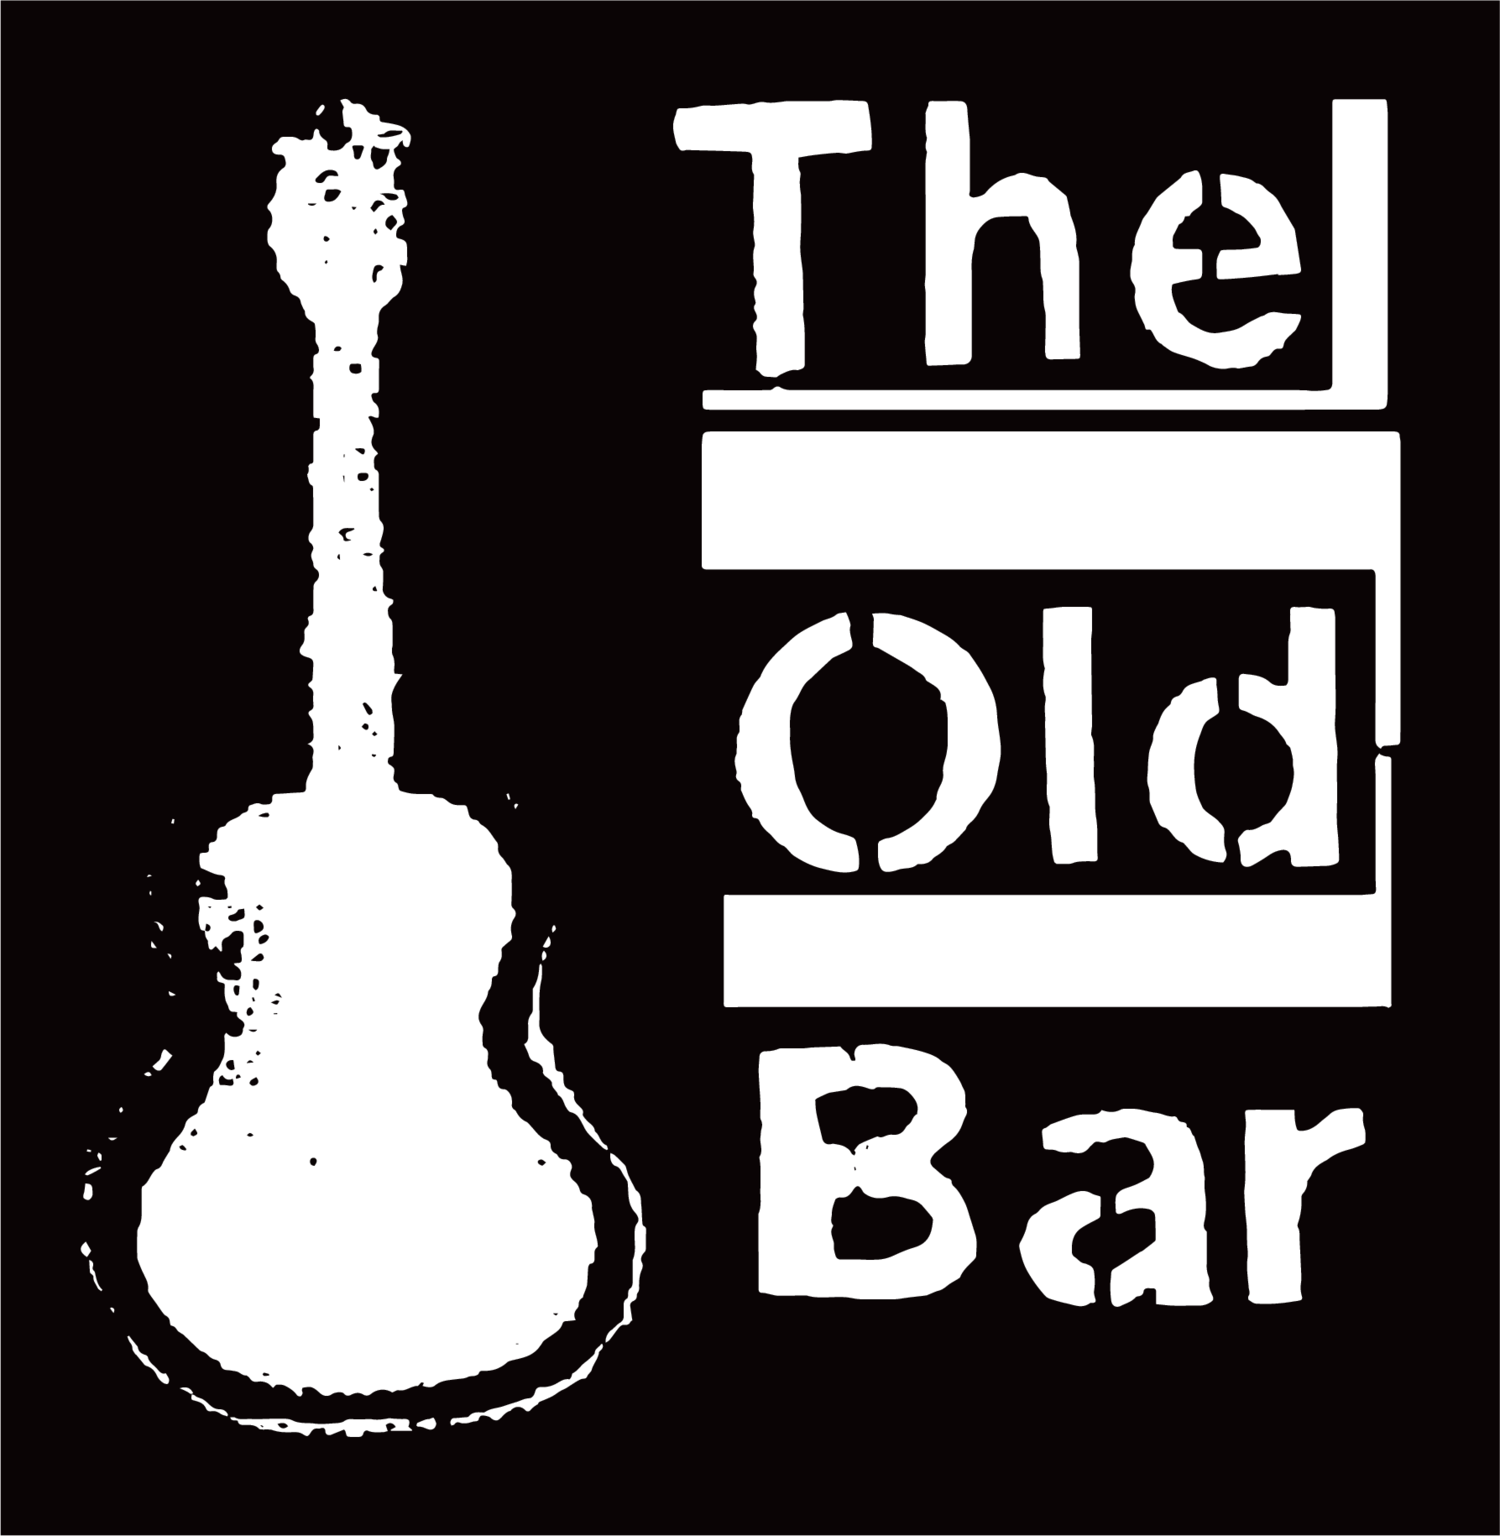 The Old Bar